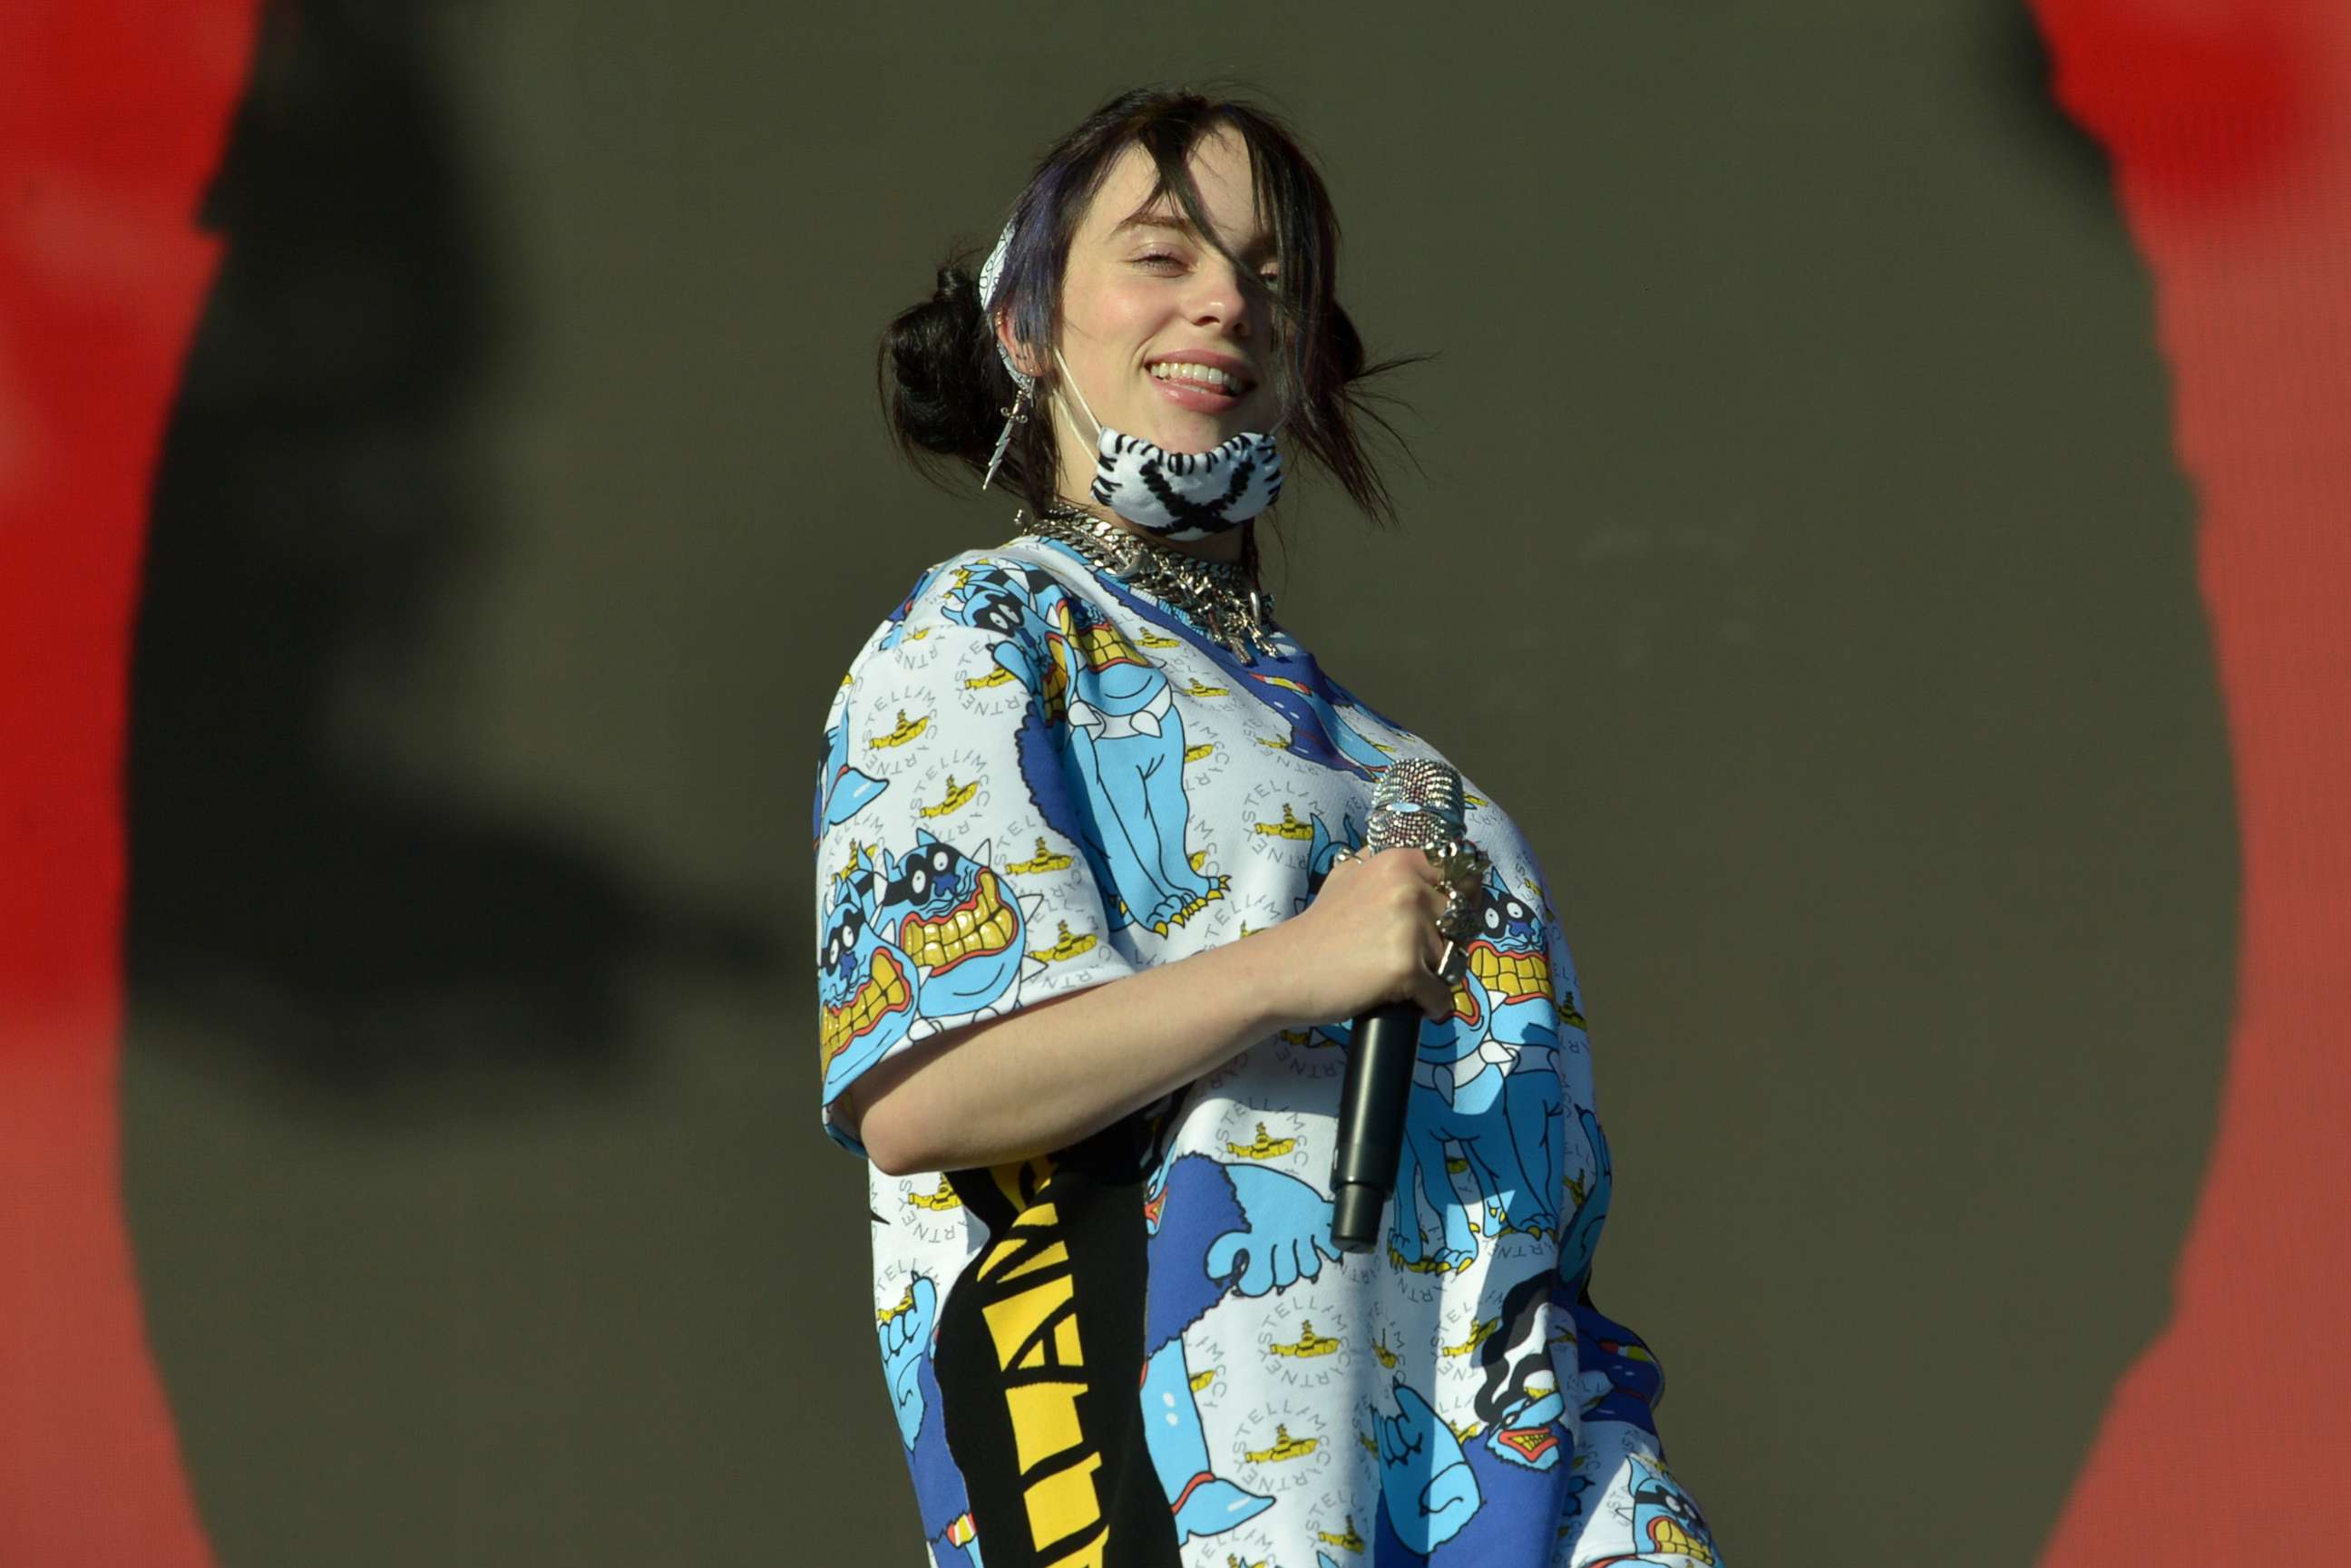 PHOTO: Billie Eilish performs live on stage during day five of Glastonbury Festival at Worthy Farm, Pilton on June 30, 2019 in Glastonbury, England.